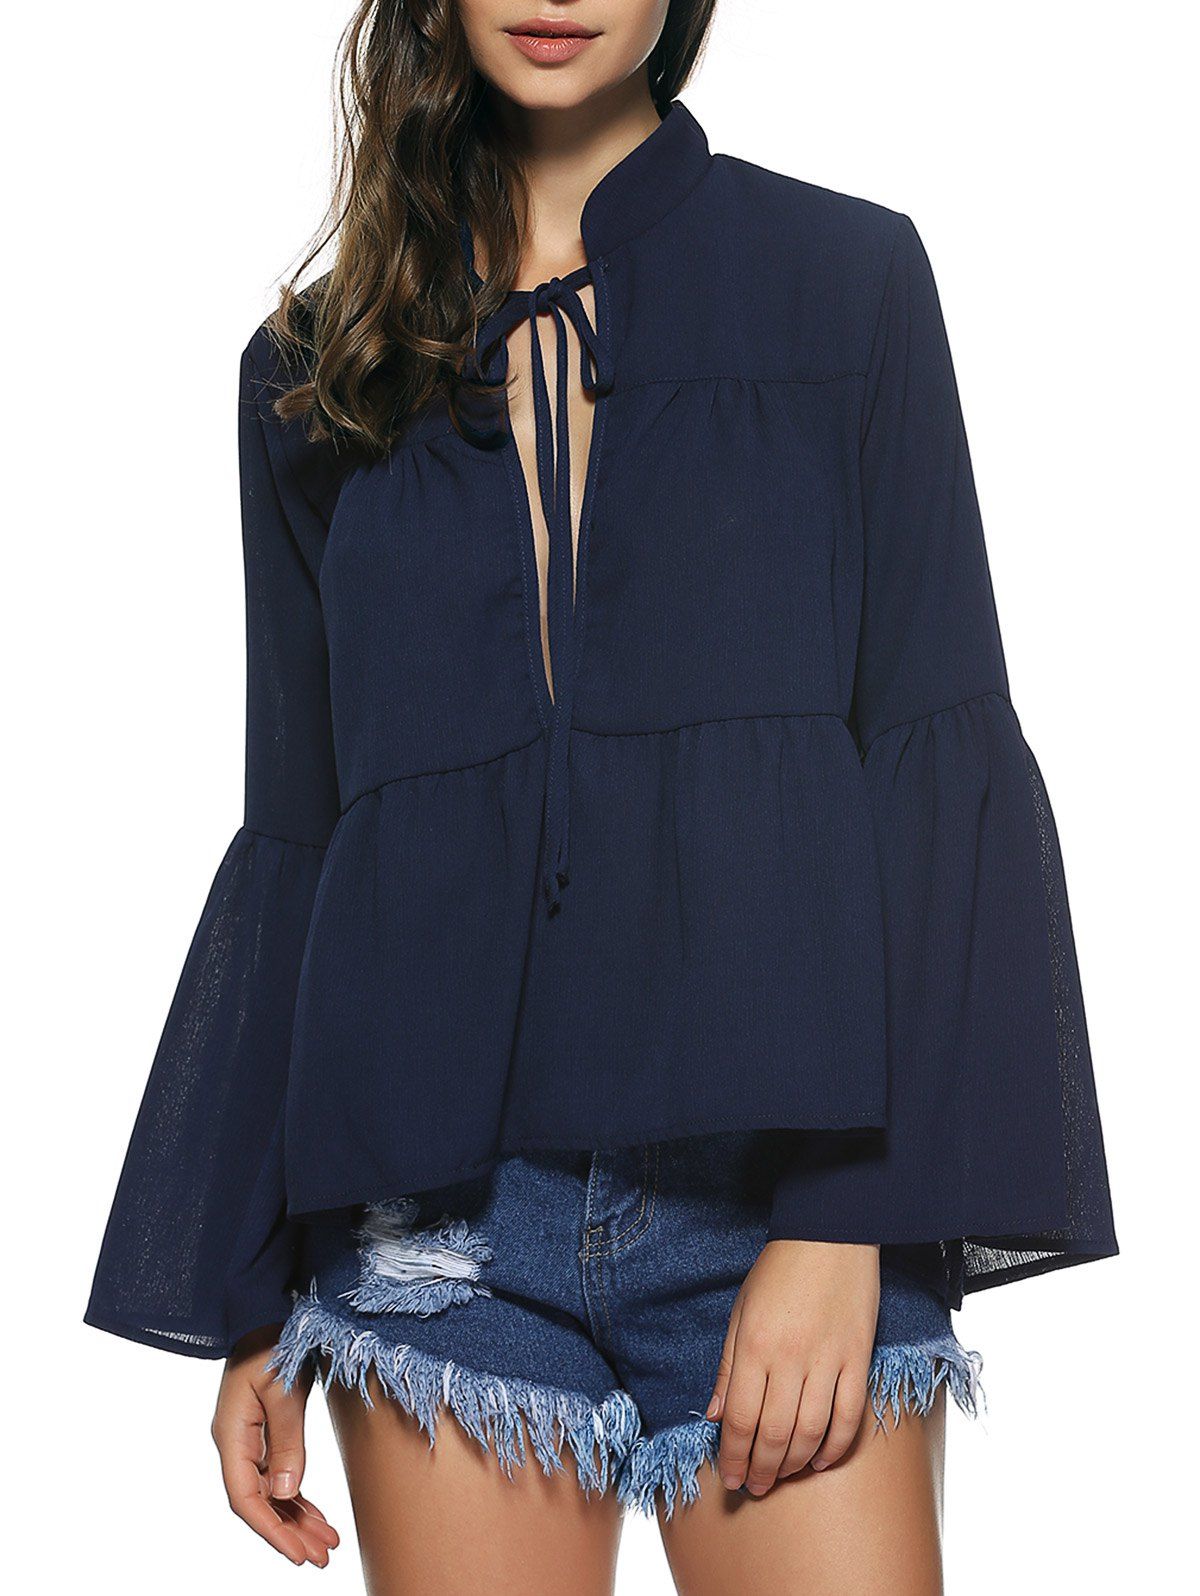 Bell Sleeves Lace Up Flounce Blouse - DEEP BLUE S